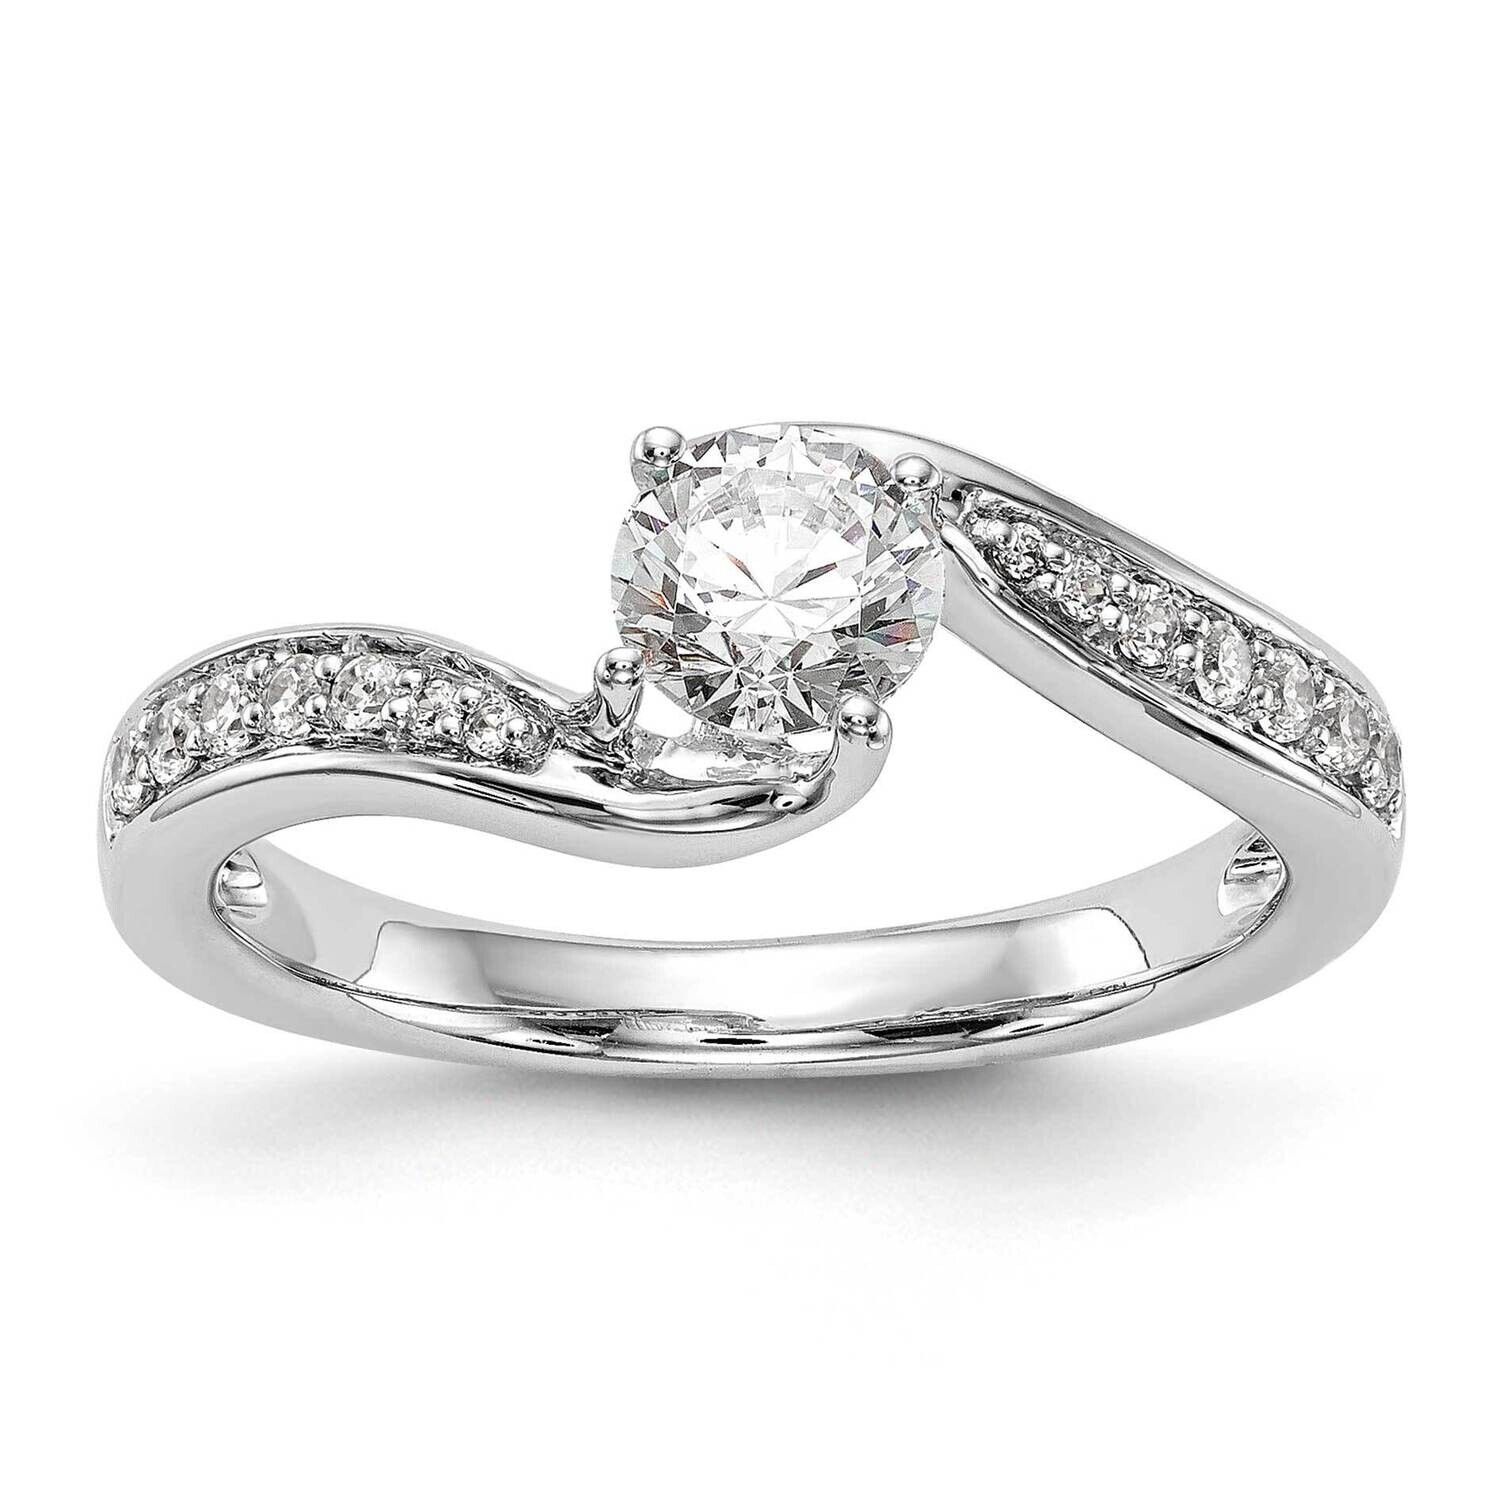 Diamond By-Pass Complete Engagement Ring 14k White Gold RM2419E-050-WAA